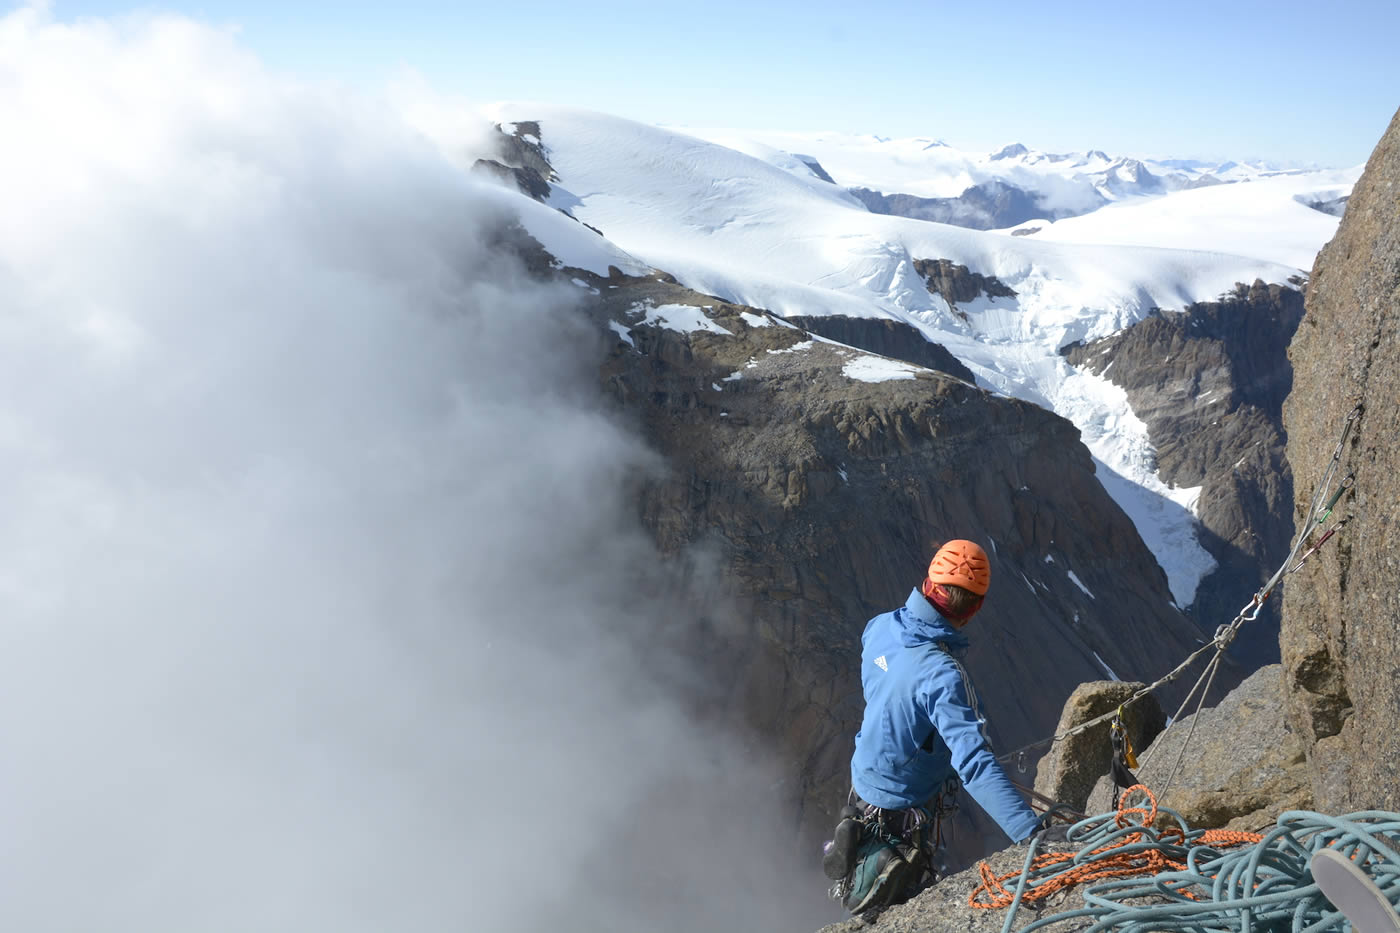 Christian Laddy Ledergerber nears the summit. Behind him are 2000 kilometers of mostly unexplored walls and fjords. [Photo] Silvan Schuepbach